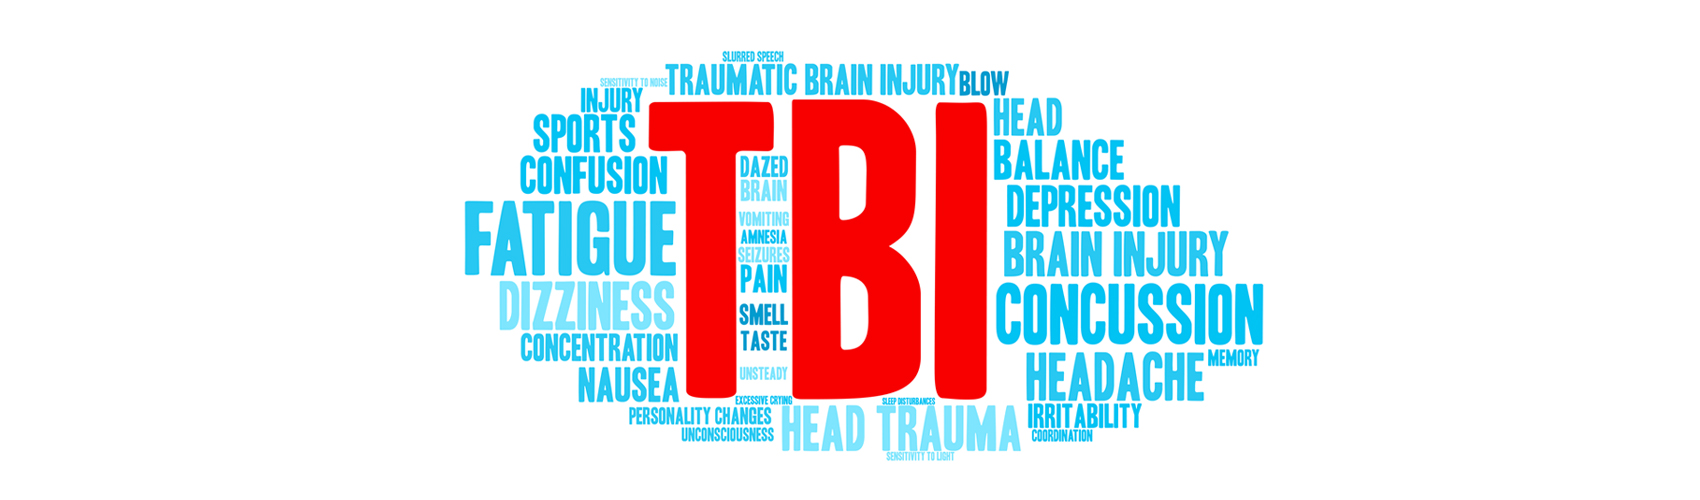 TBI red font center page with symptom descriptions surrounding word in blue font color